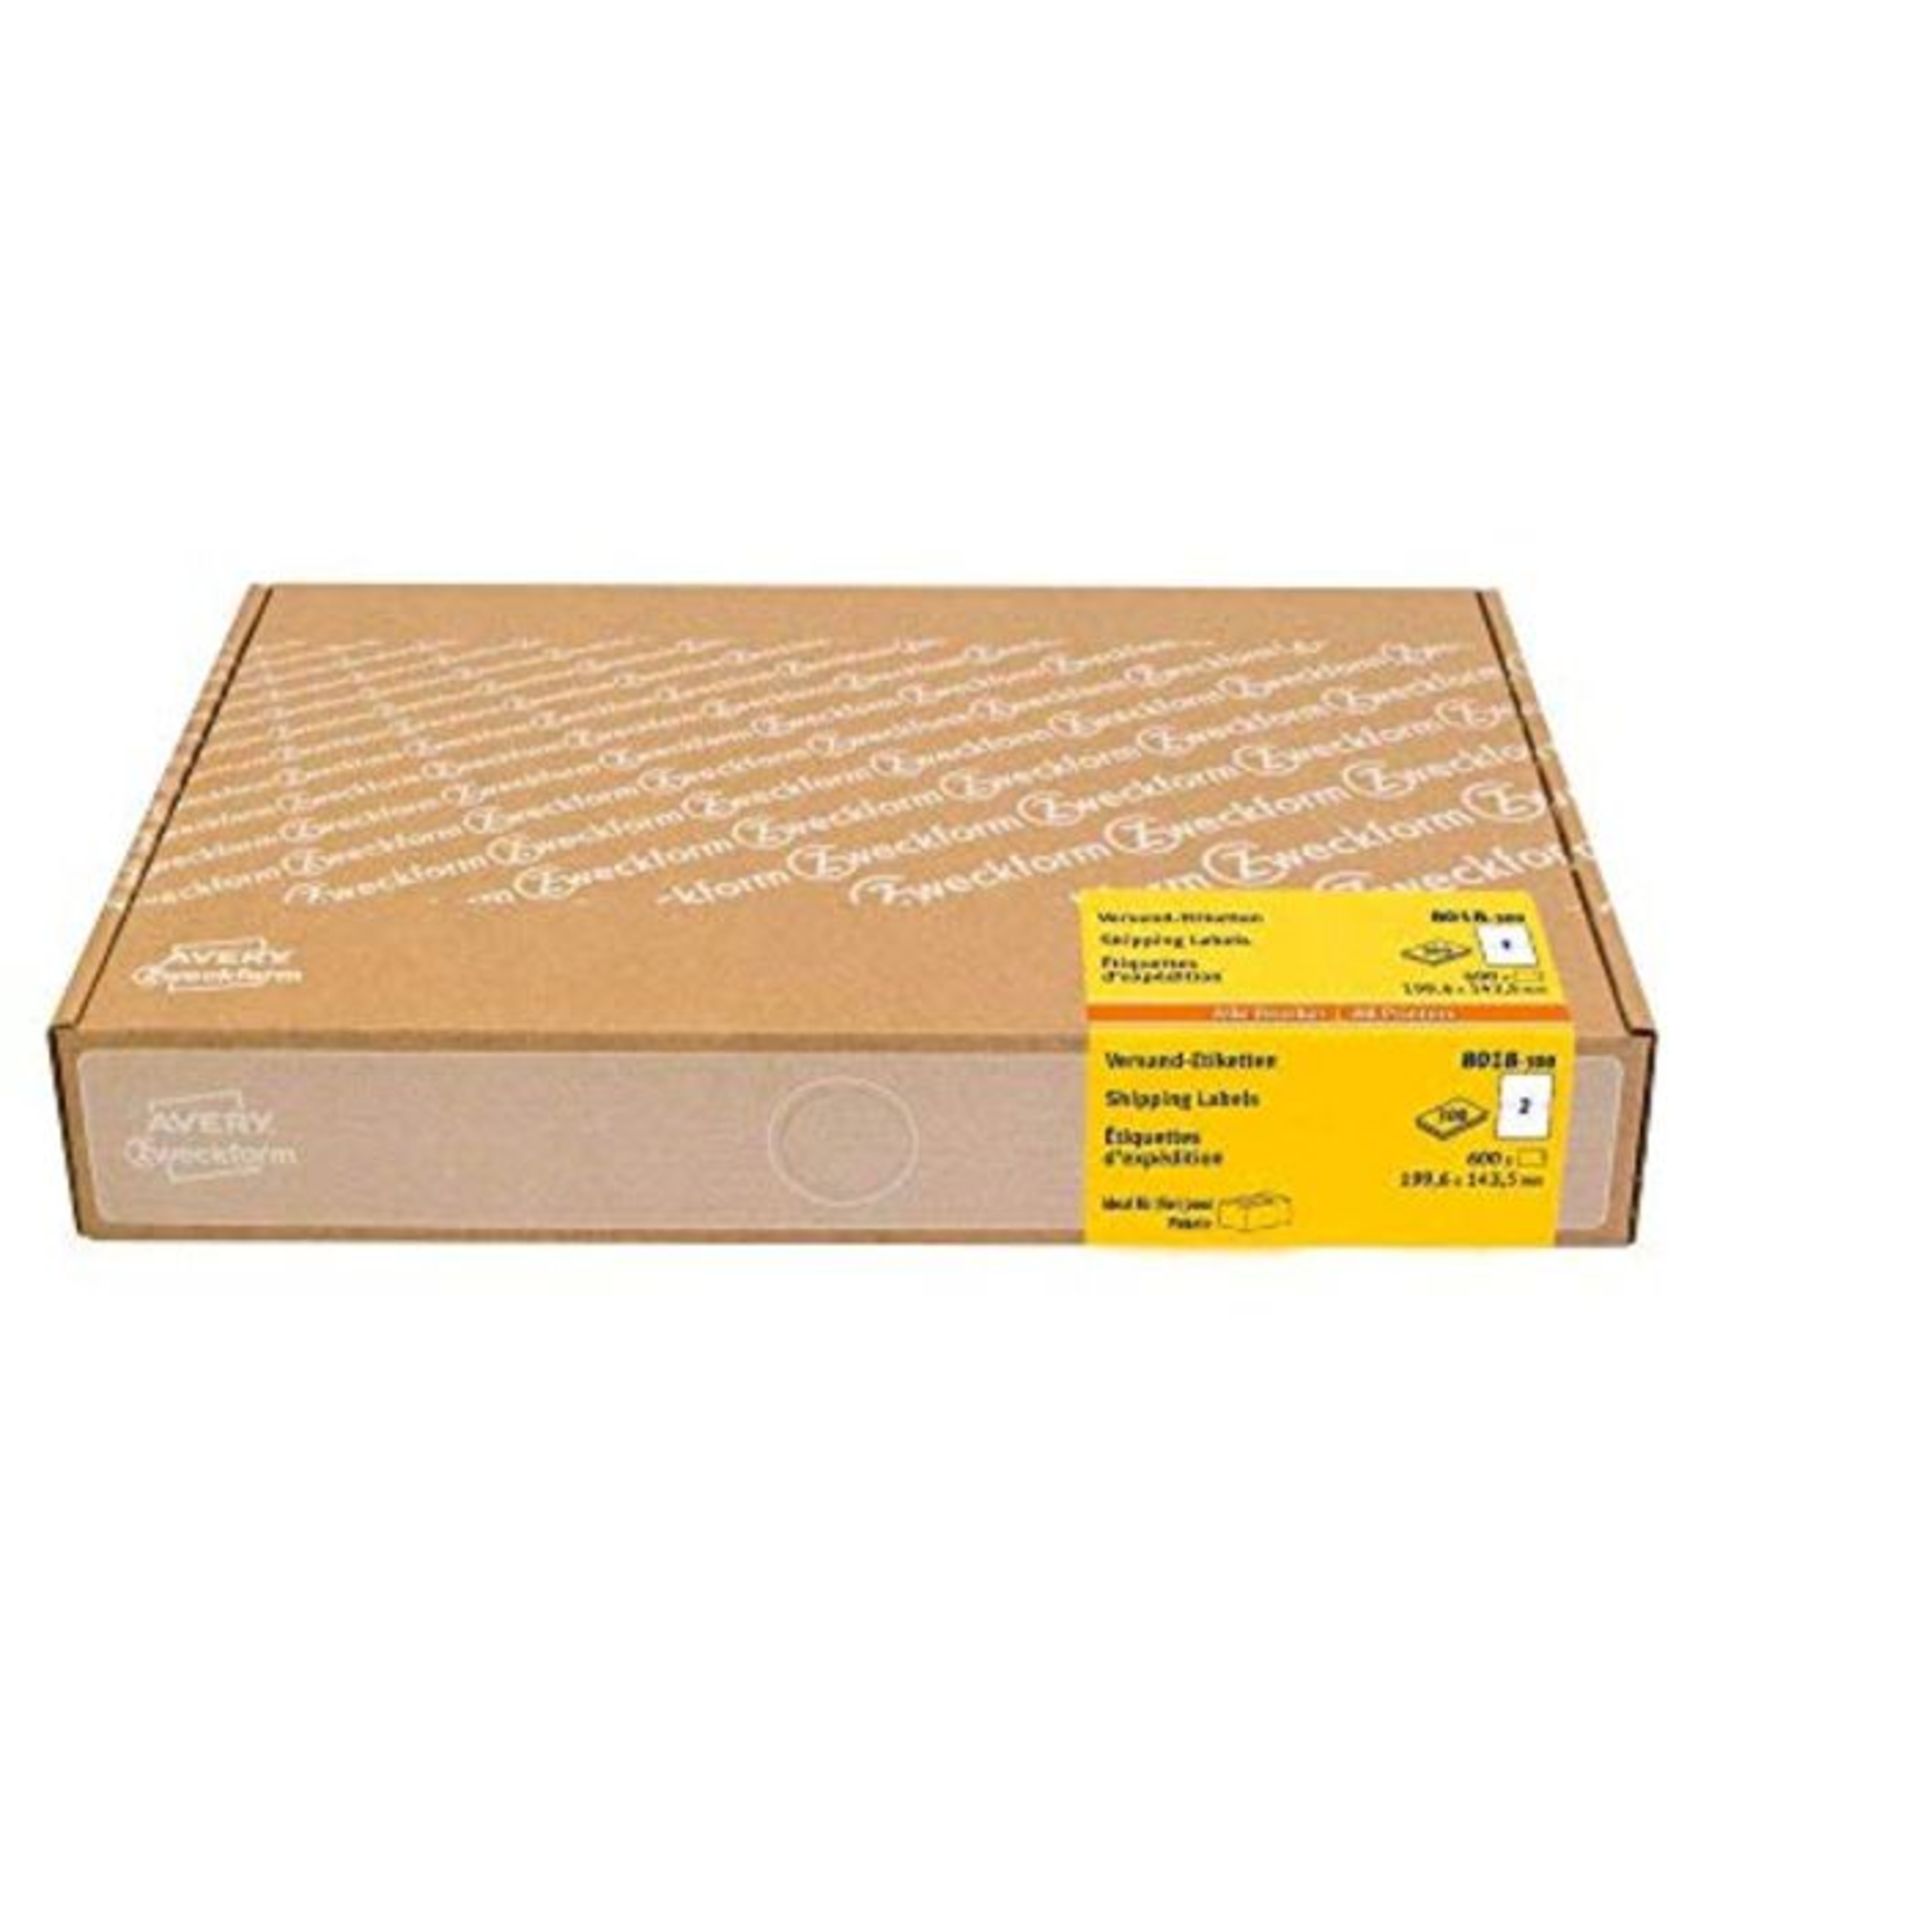 Avery Zweckform 8018 300  Labels 199.6 x 143.5 mm (A5), 600 Pieces